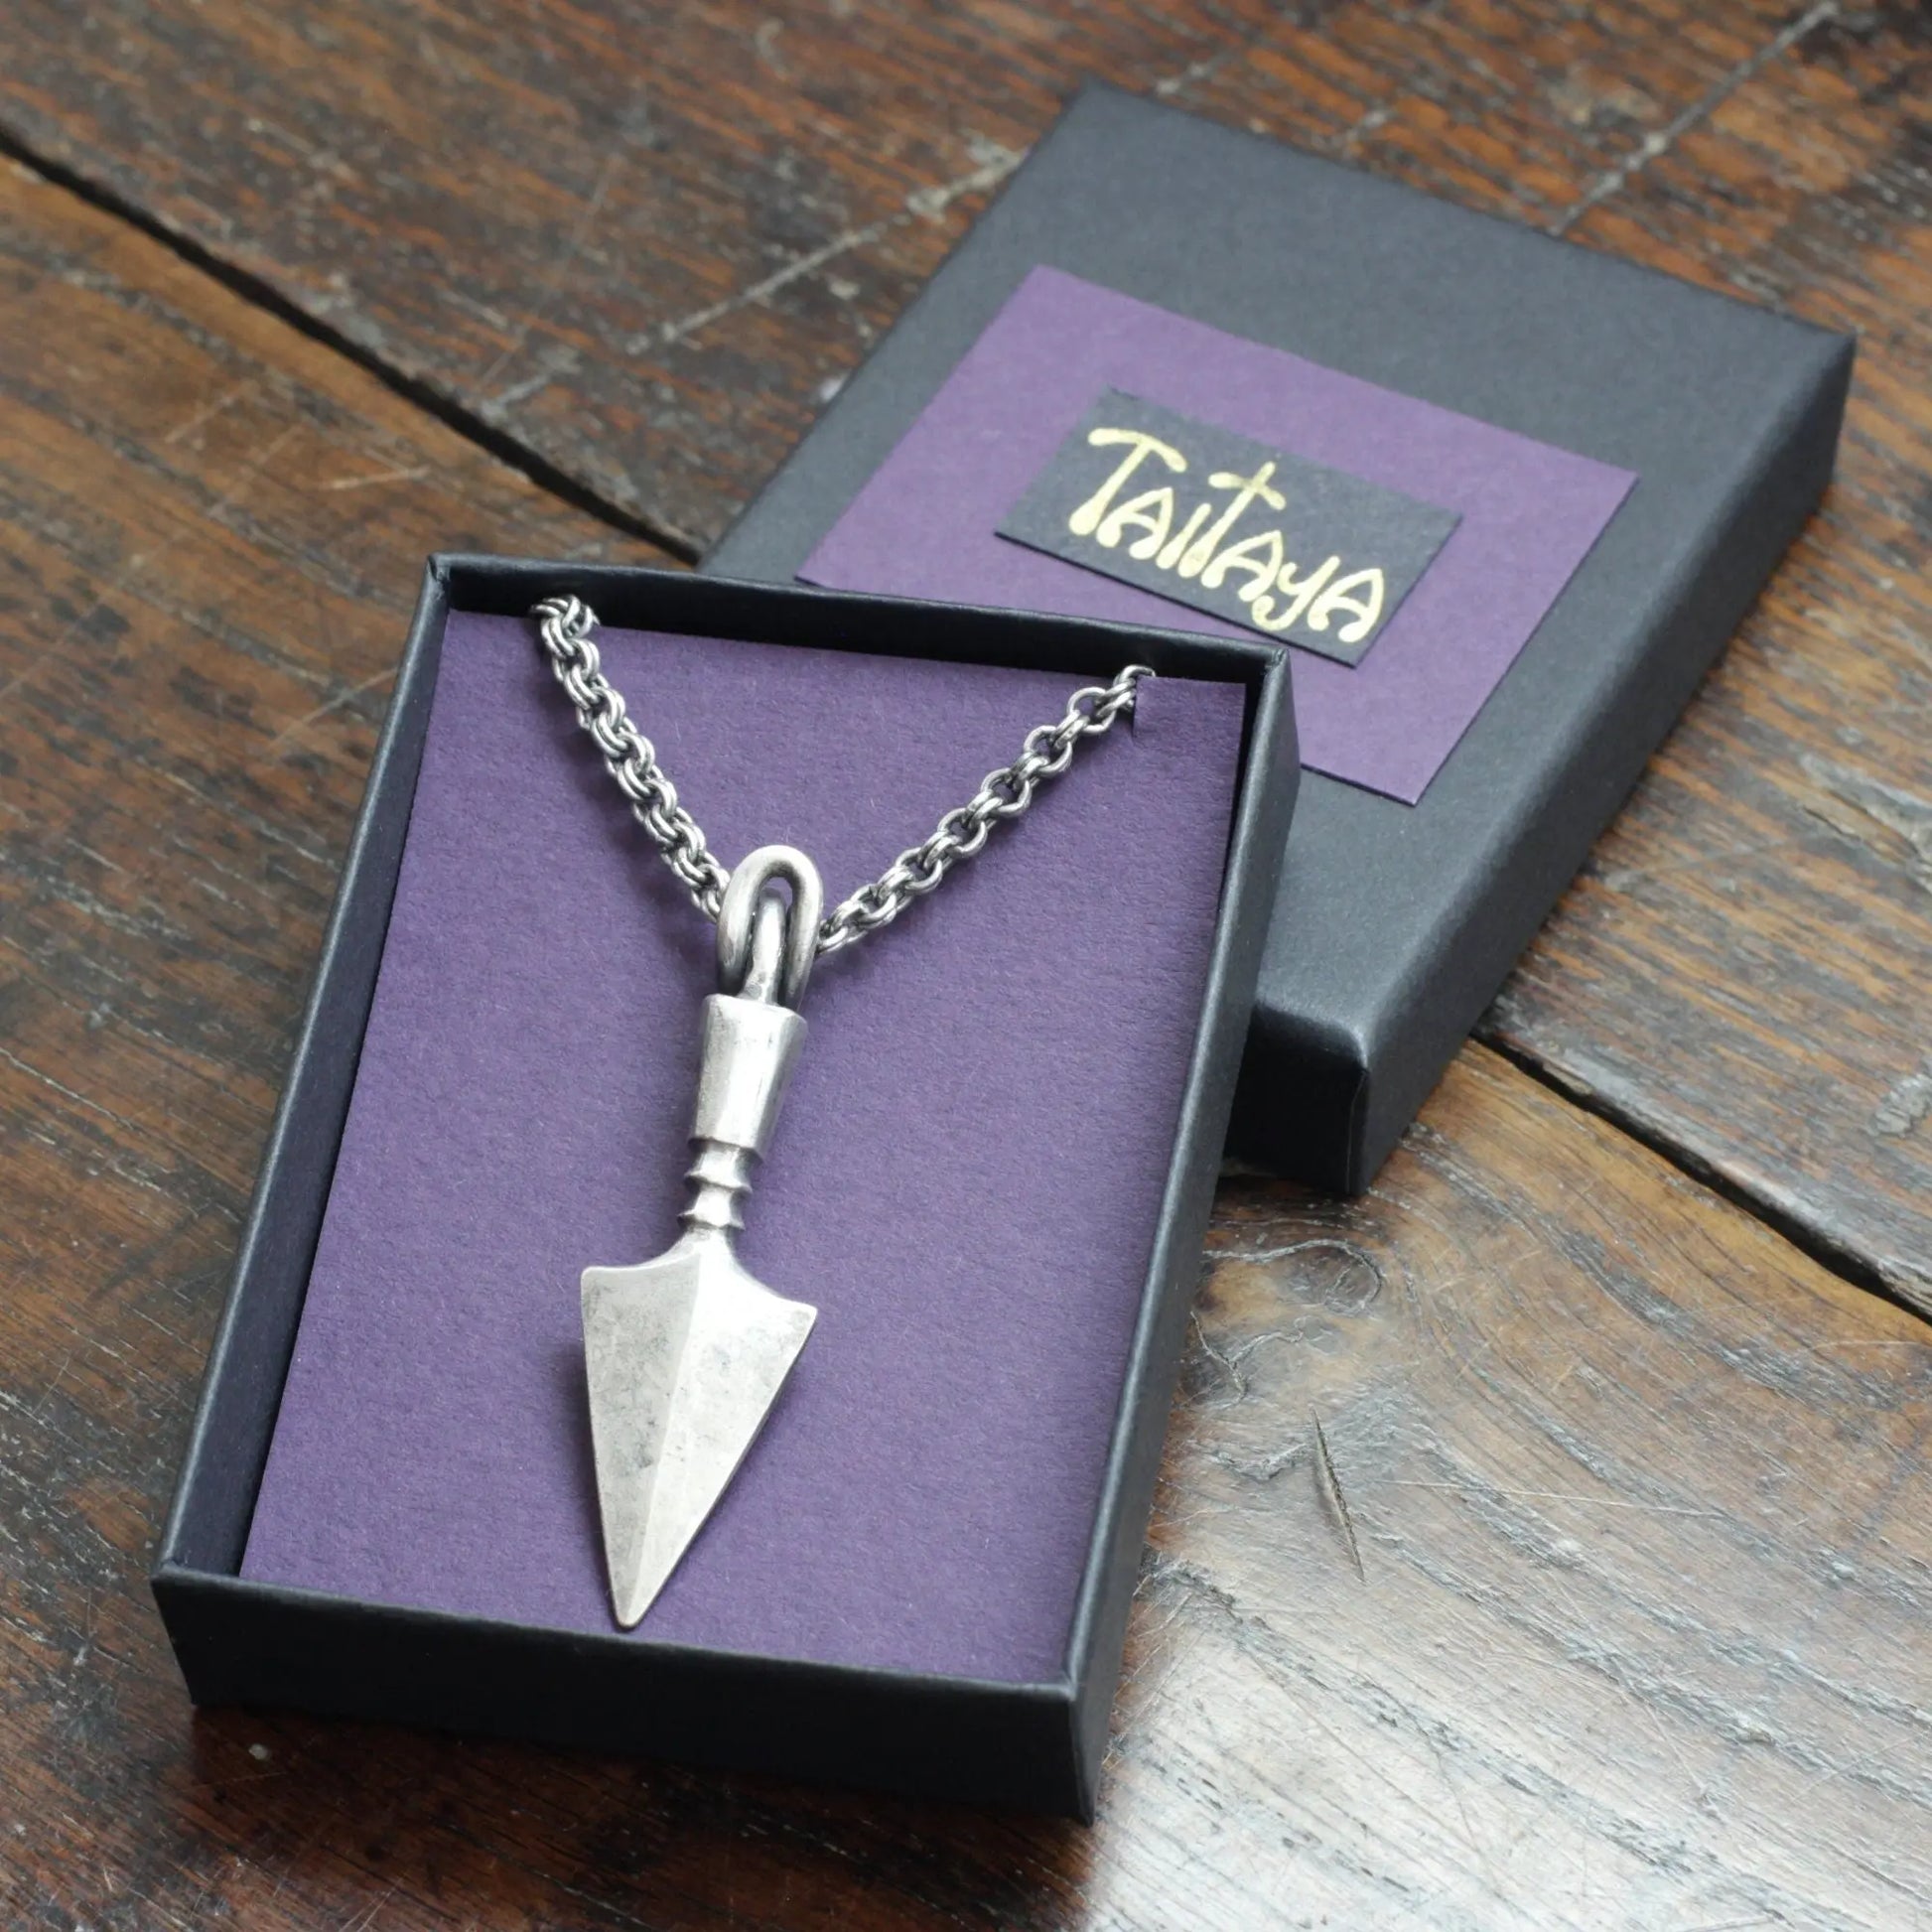 Forged Silver Arrow Necklace, a Viking age arrow pendant necklace